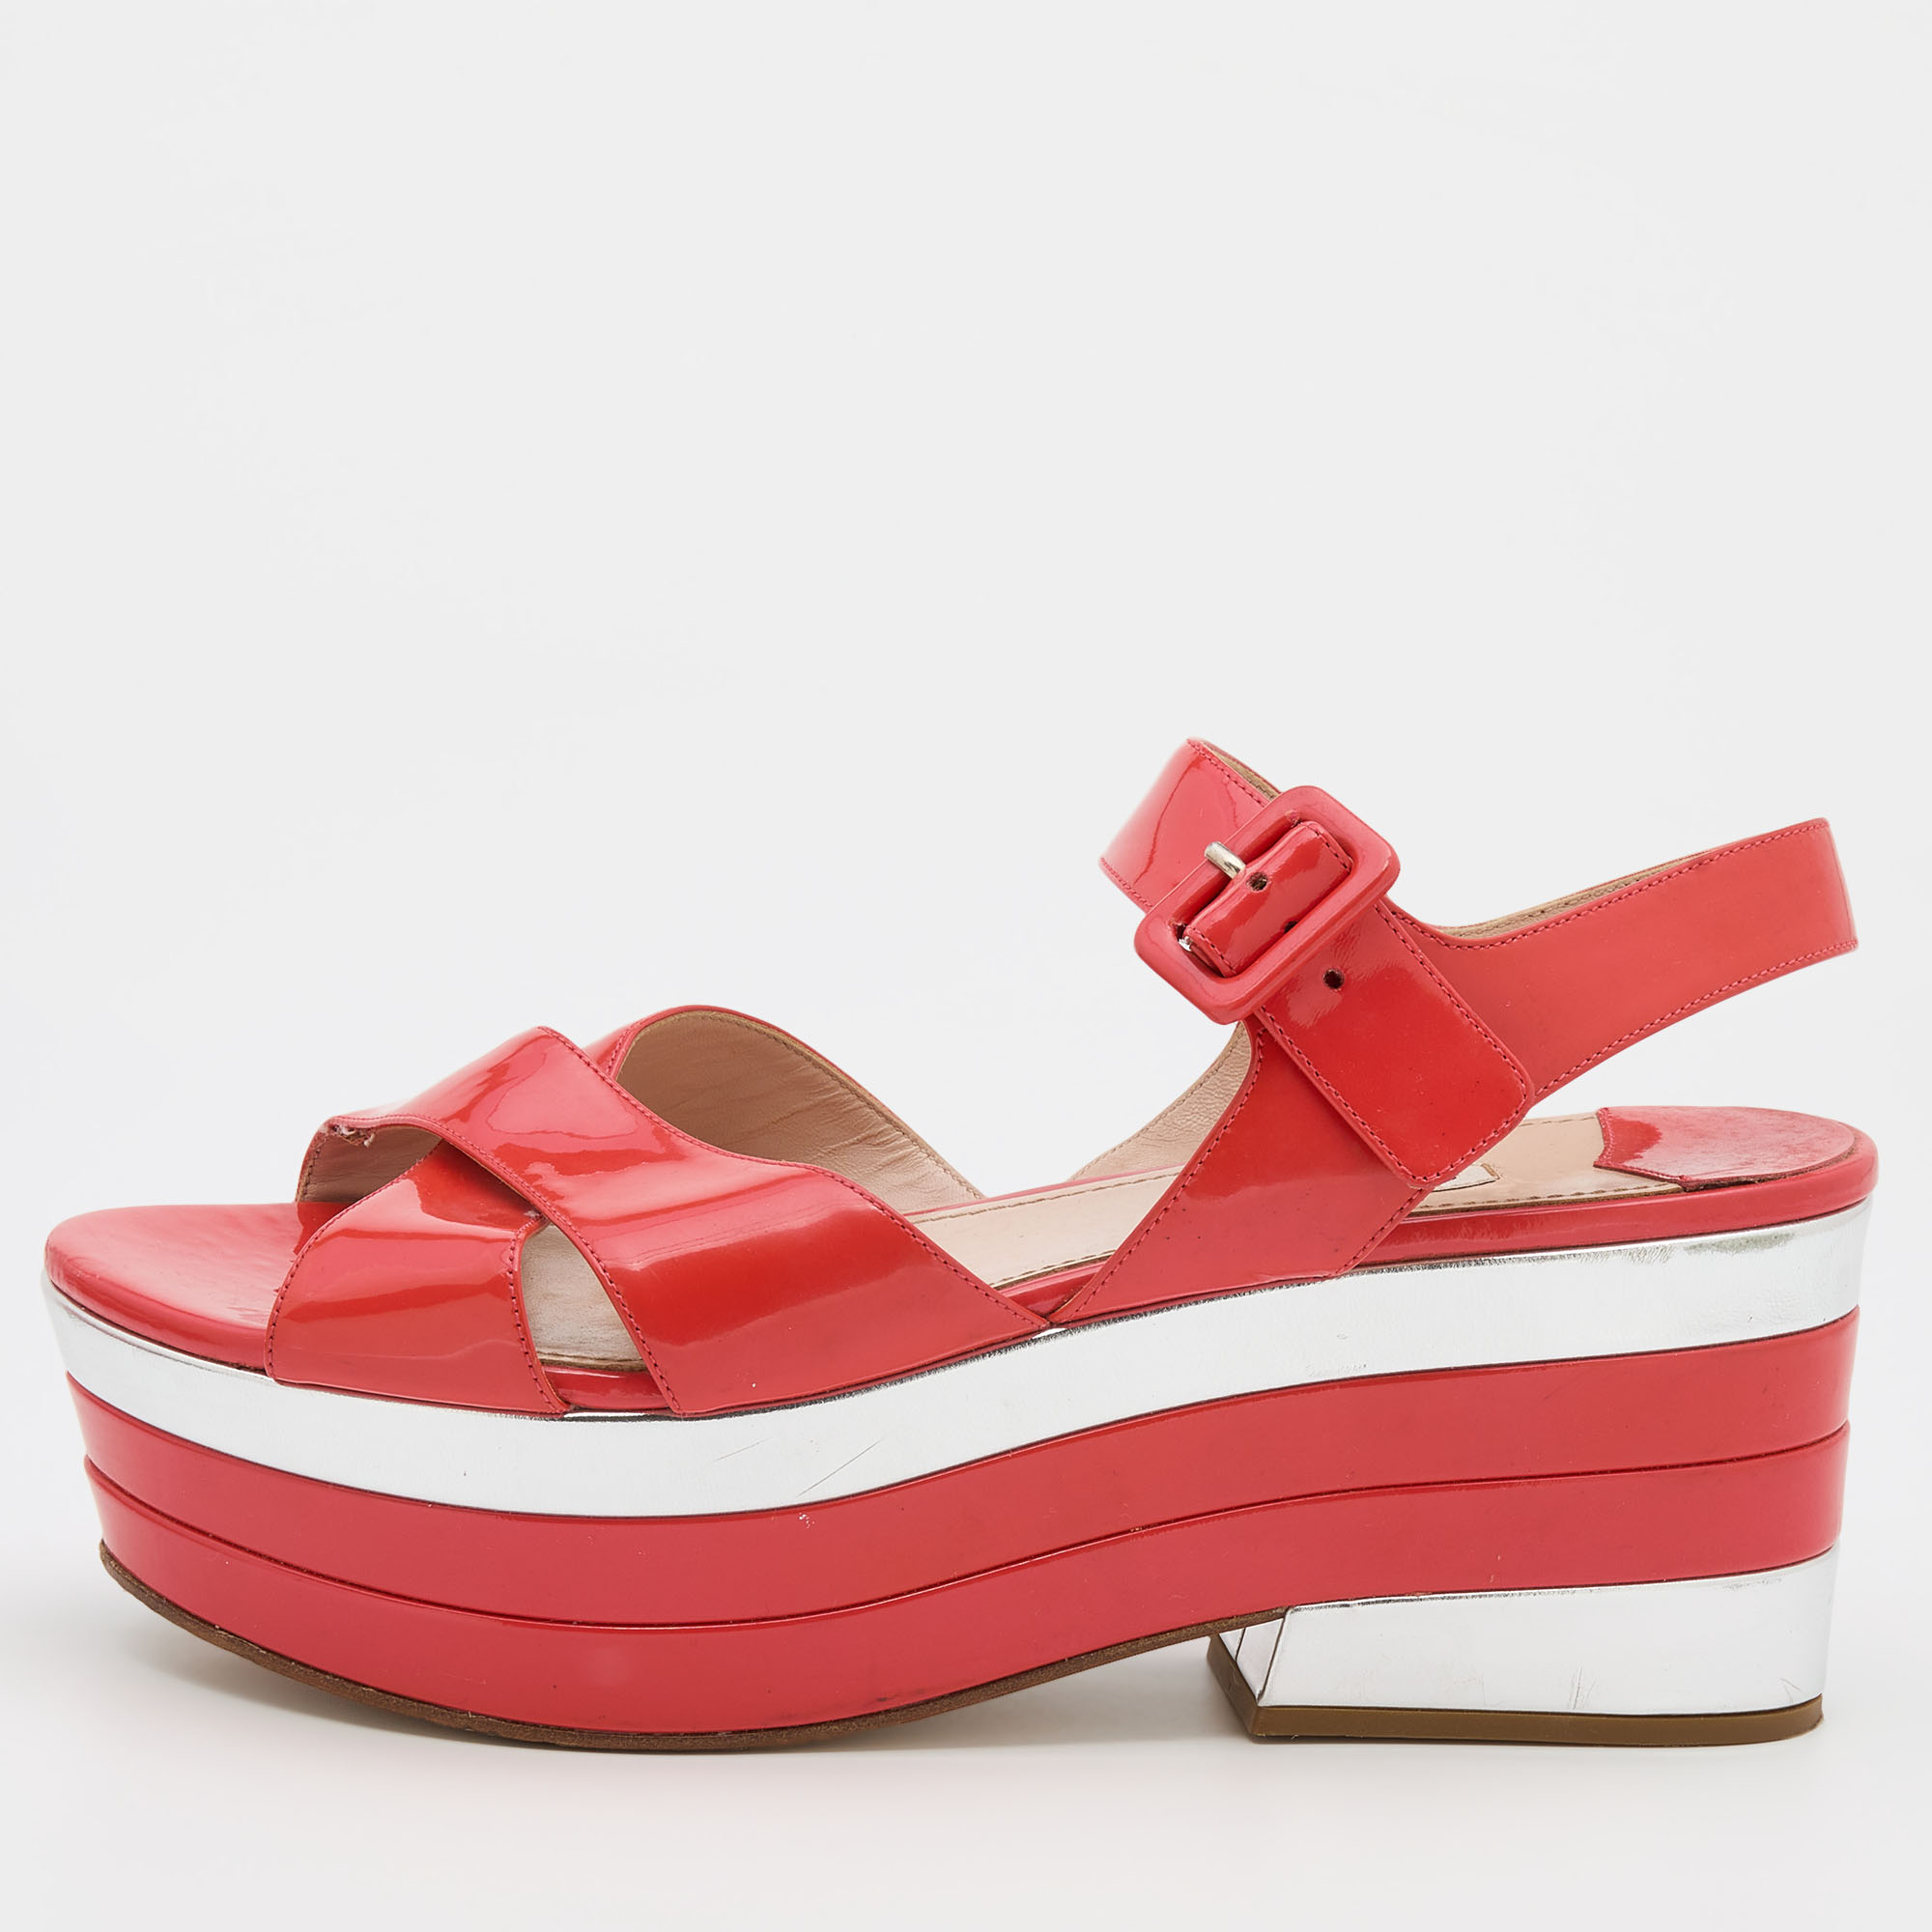 Walk stylishly as you flaunt these sandals from the house of Miu Miu. Designed using coral red patent leather these sandals are augmented with buckled ankle straps platforms and 7.5 cm wedge heels. They feature silver toned hardware. Match them with your summer dresses for a chic style.